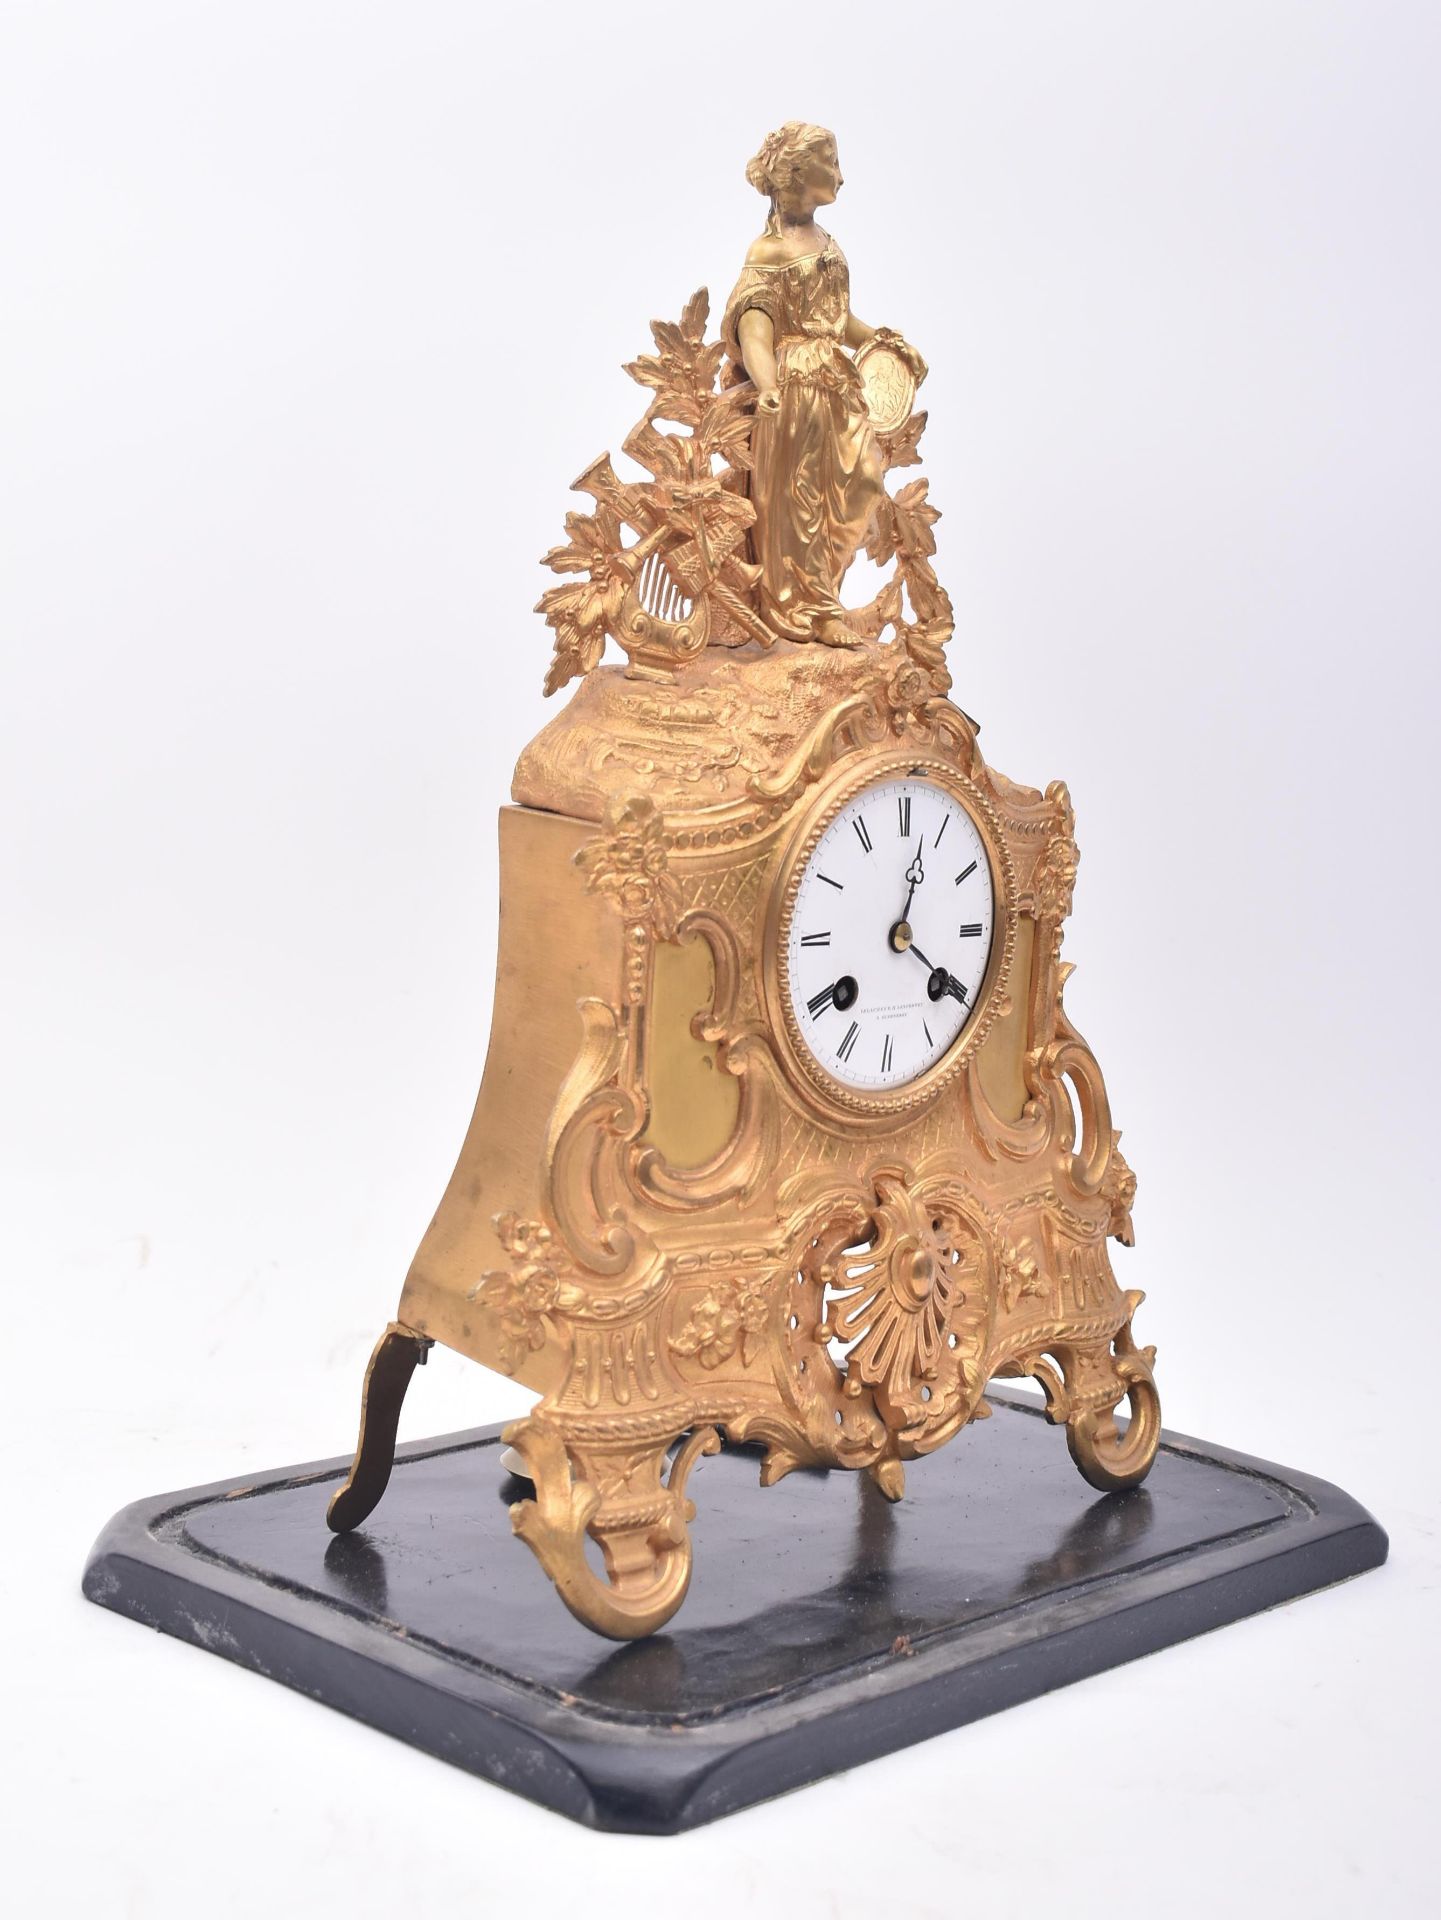 19TH CENTURY FRENCH VINCENTI & CIE DOME MANTEL CLOCK - Image 4 of 8